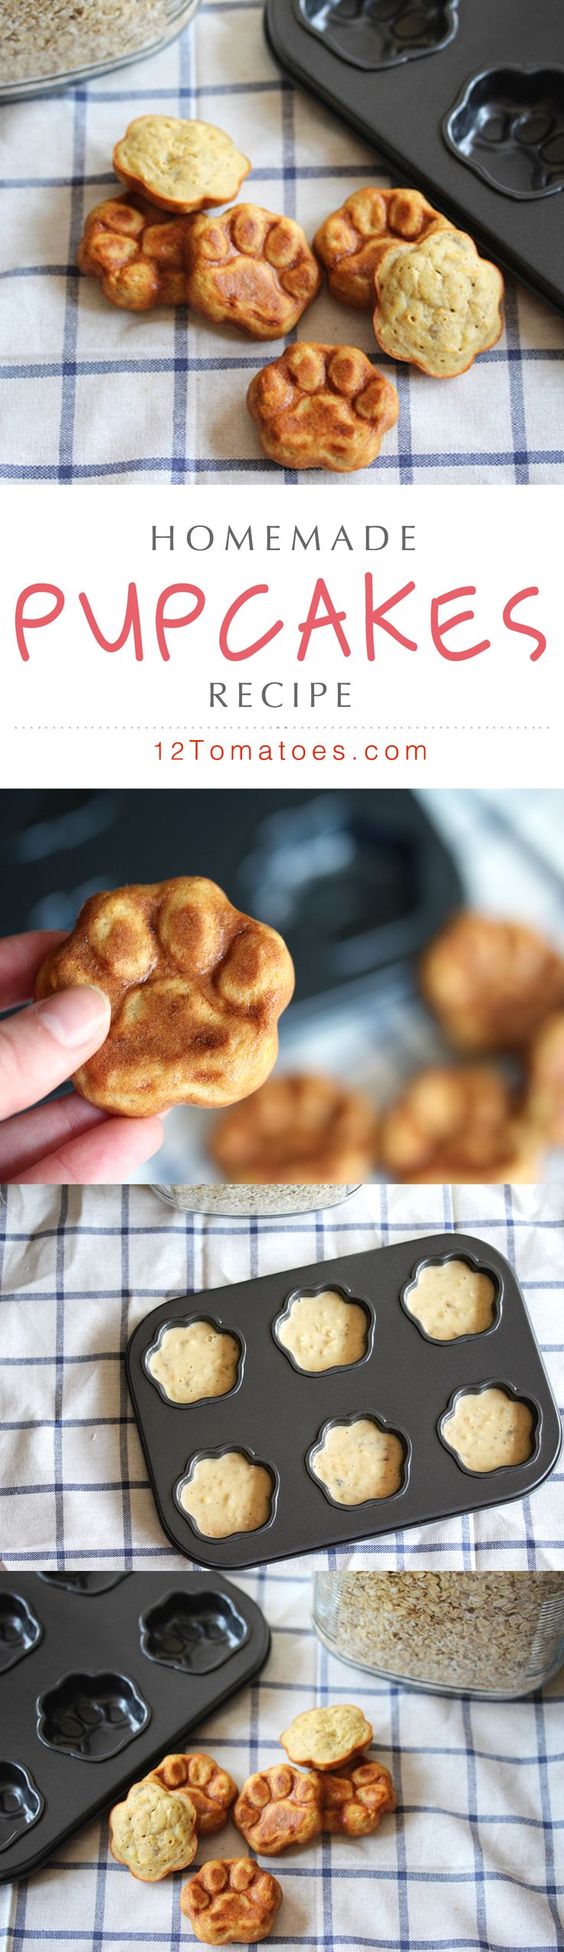 We love our furry family members so much, we can’t help but spoil them with fresh and healthy treats that they devour in seconds…plus, we simply can’t get enough of those little paw prints! Our dogs love this recipe (and we love it for it’s fresh simplicity), but combined with this muffin tin, these pupcakes really couldn’t get any better!